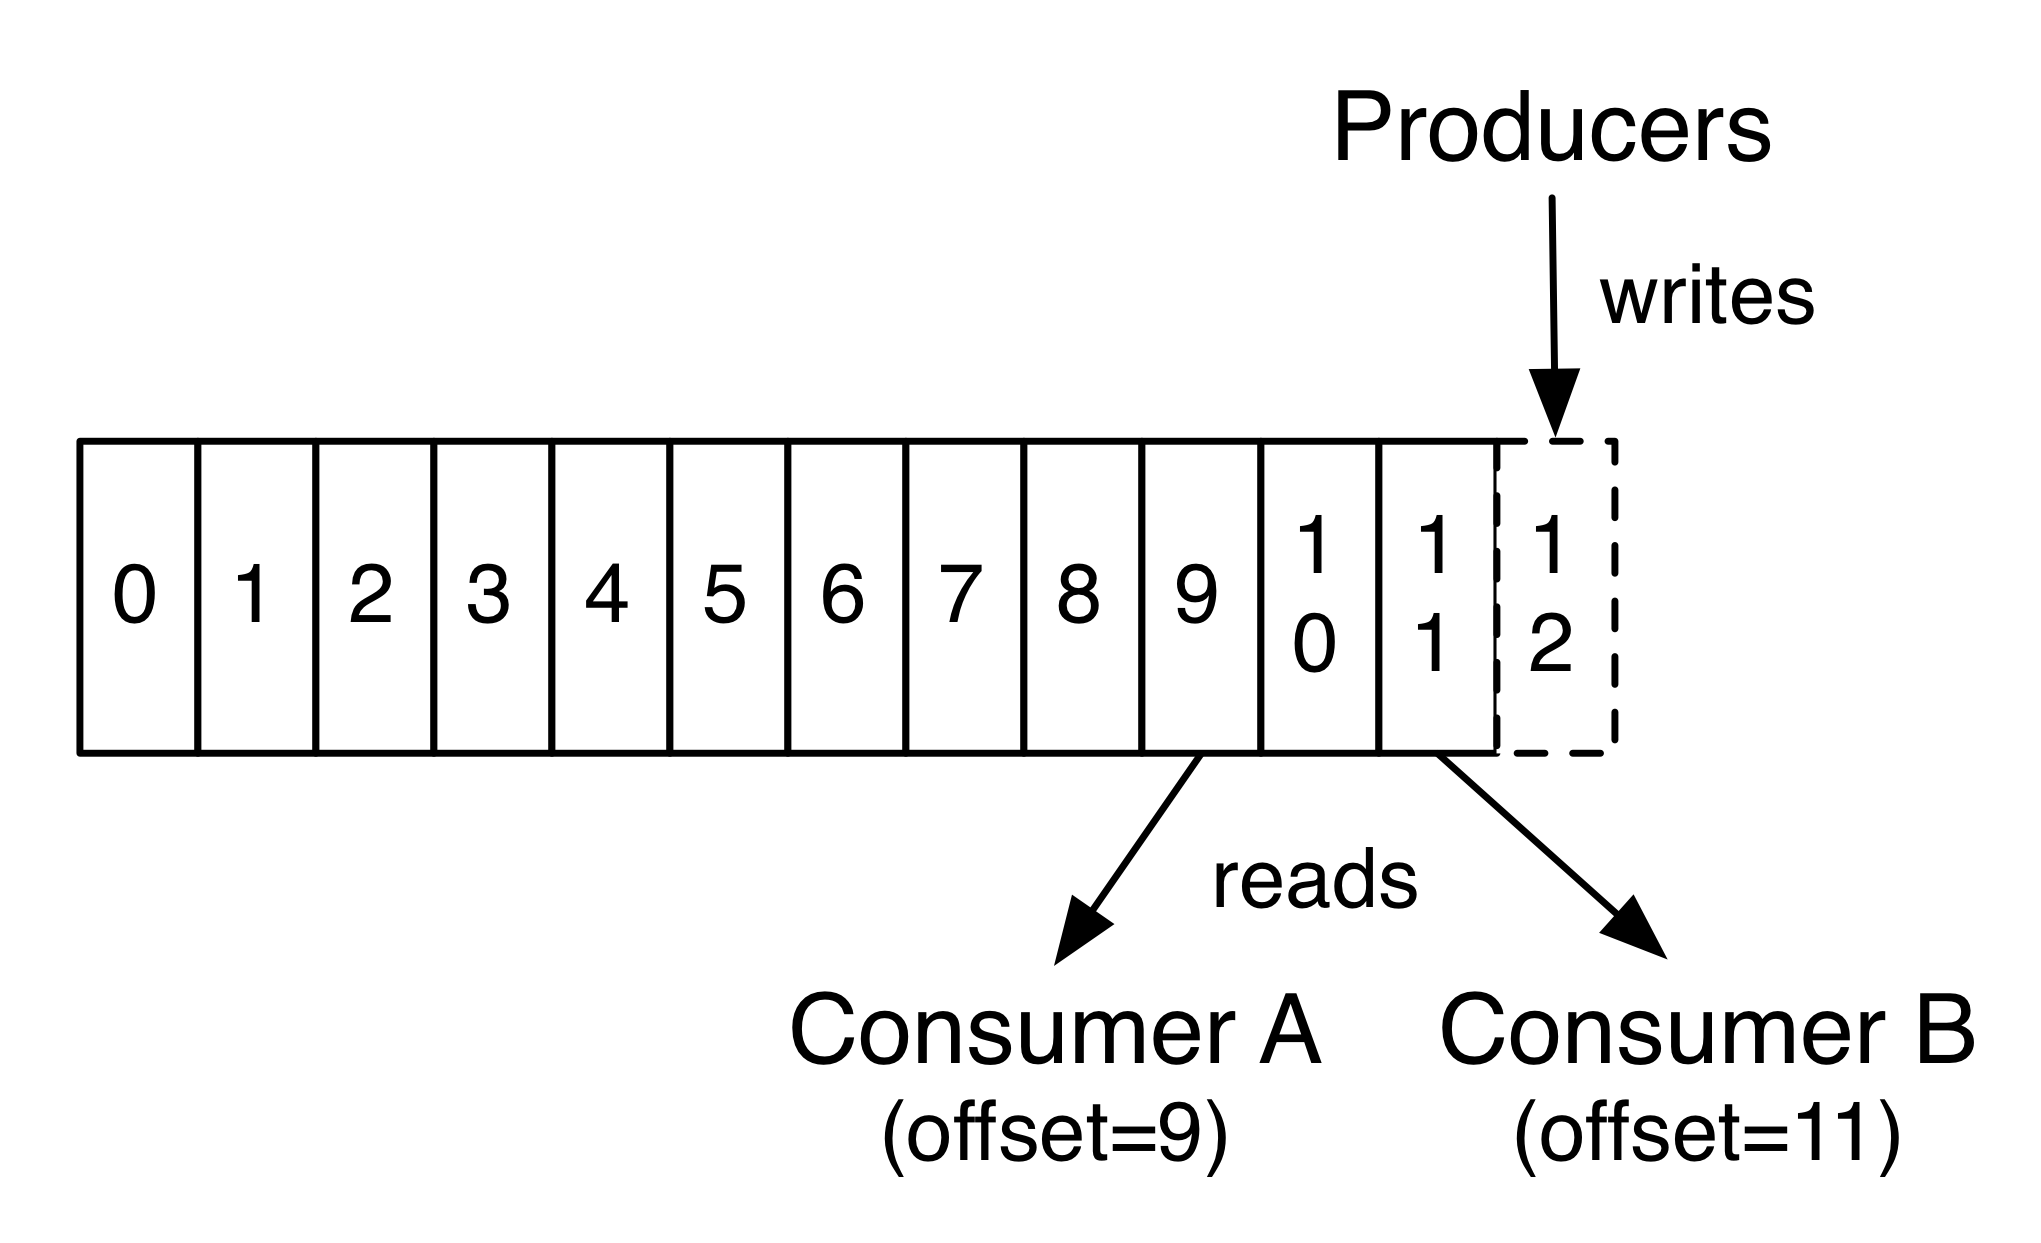 A log with producers and consumers writing and reading at different offsets